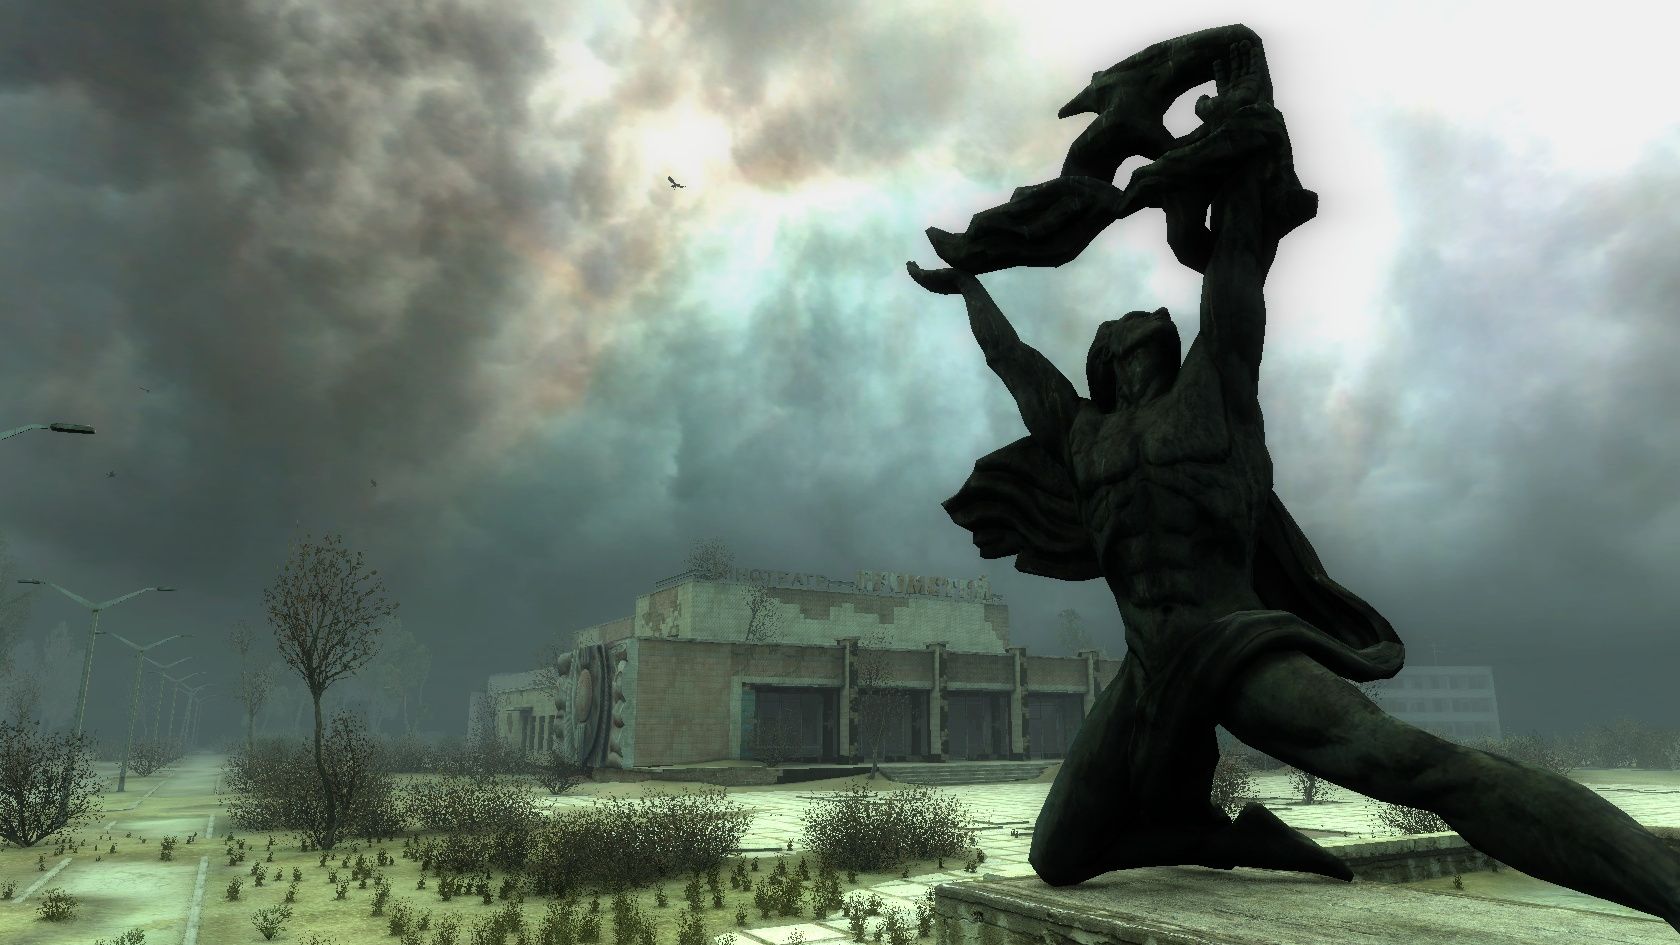 The landscape of STALKER, a statue of a man holding up a flaming torch in the foreground, a crumbling building in the background, and strange blue light in the cloudy skies